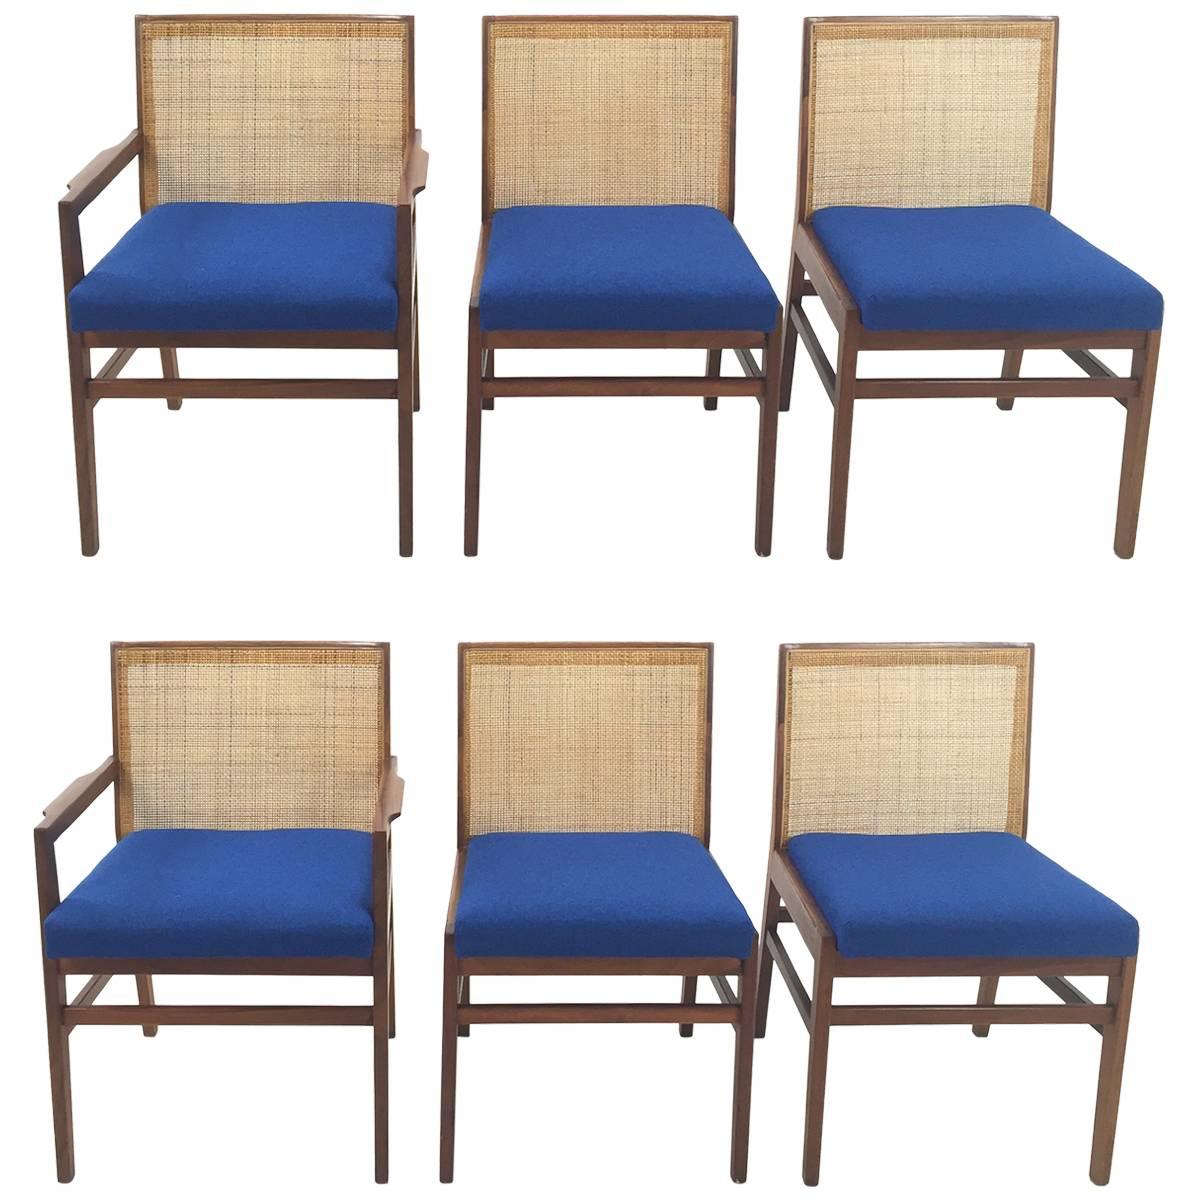 Milo Baughman Cane and Walnut Dining Chairs for Arch Gordon